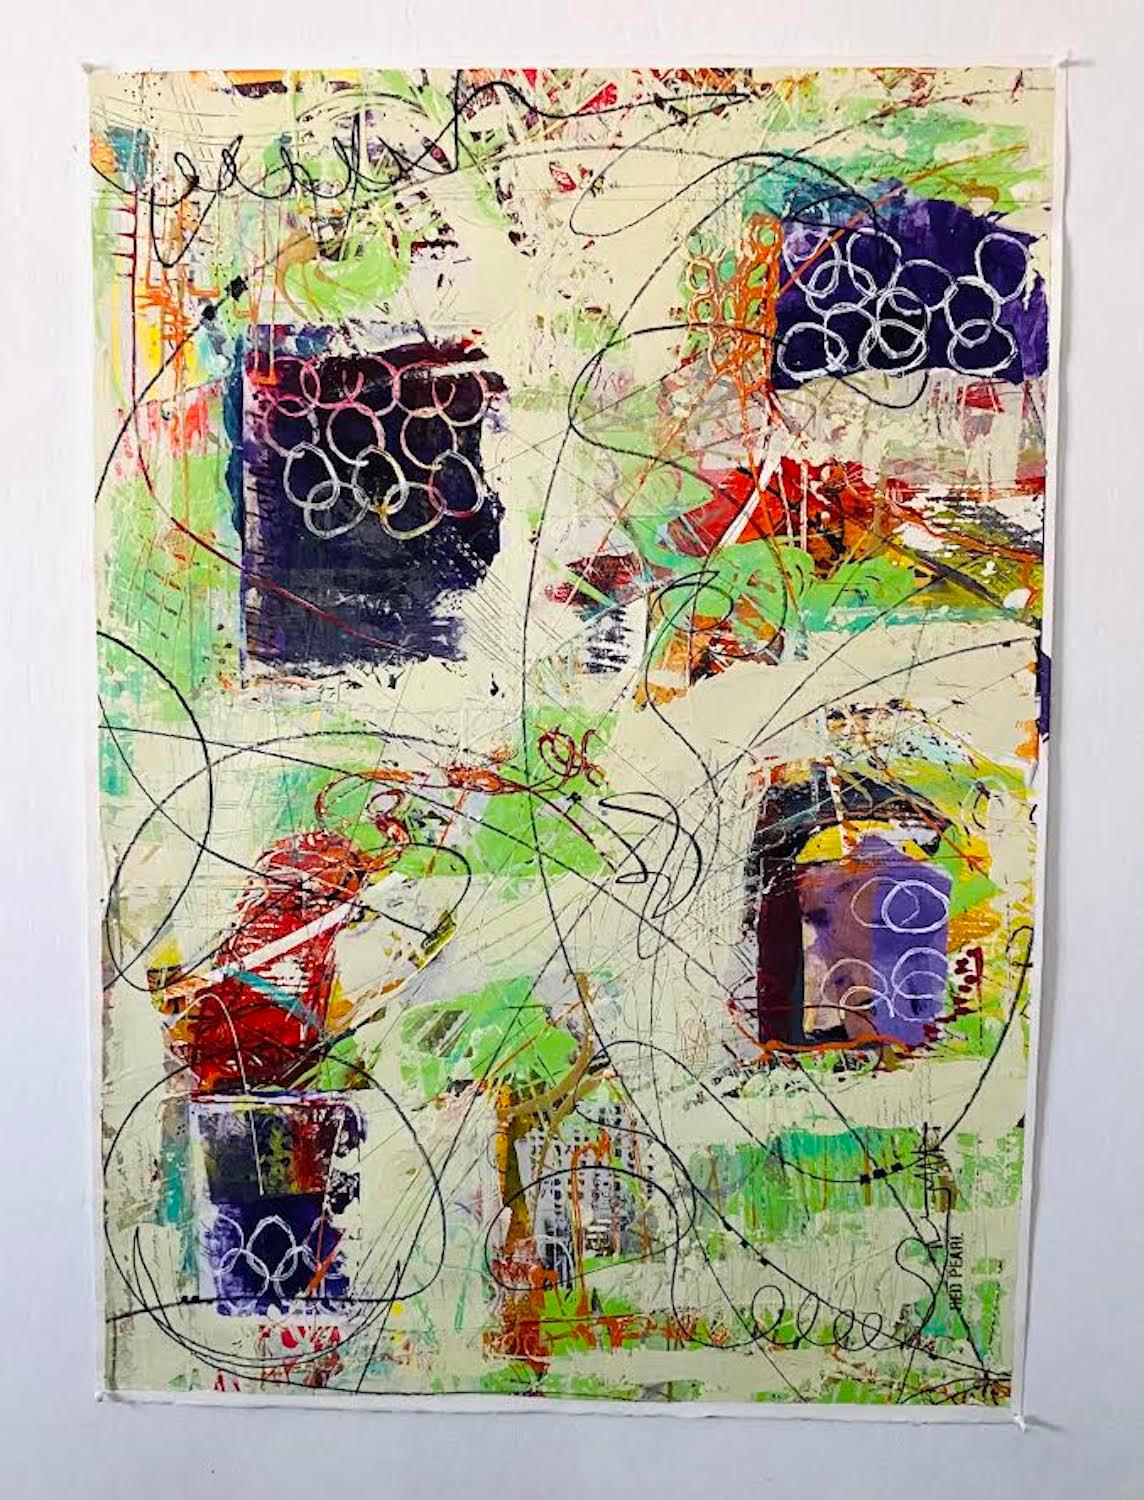 <p>Artist Comments<br>Artist Linda Shaffer presents a bold multi-layered abstract, in shades of off-white, orange, red, purple, and green. Scribbled mark-making decorates the surface with original images complementing the work. â€œThis painting is